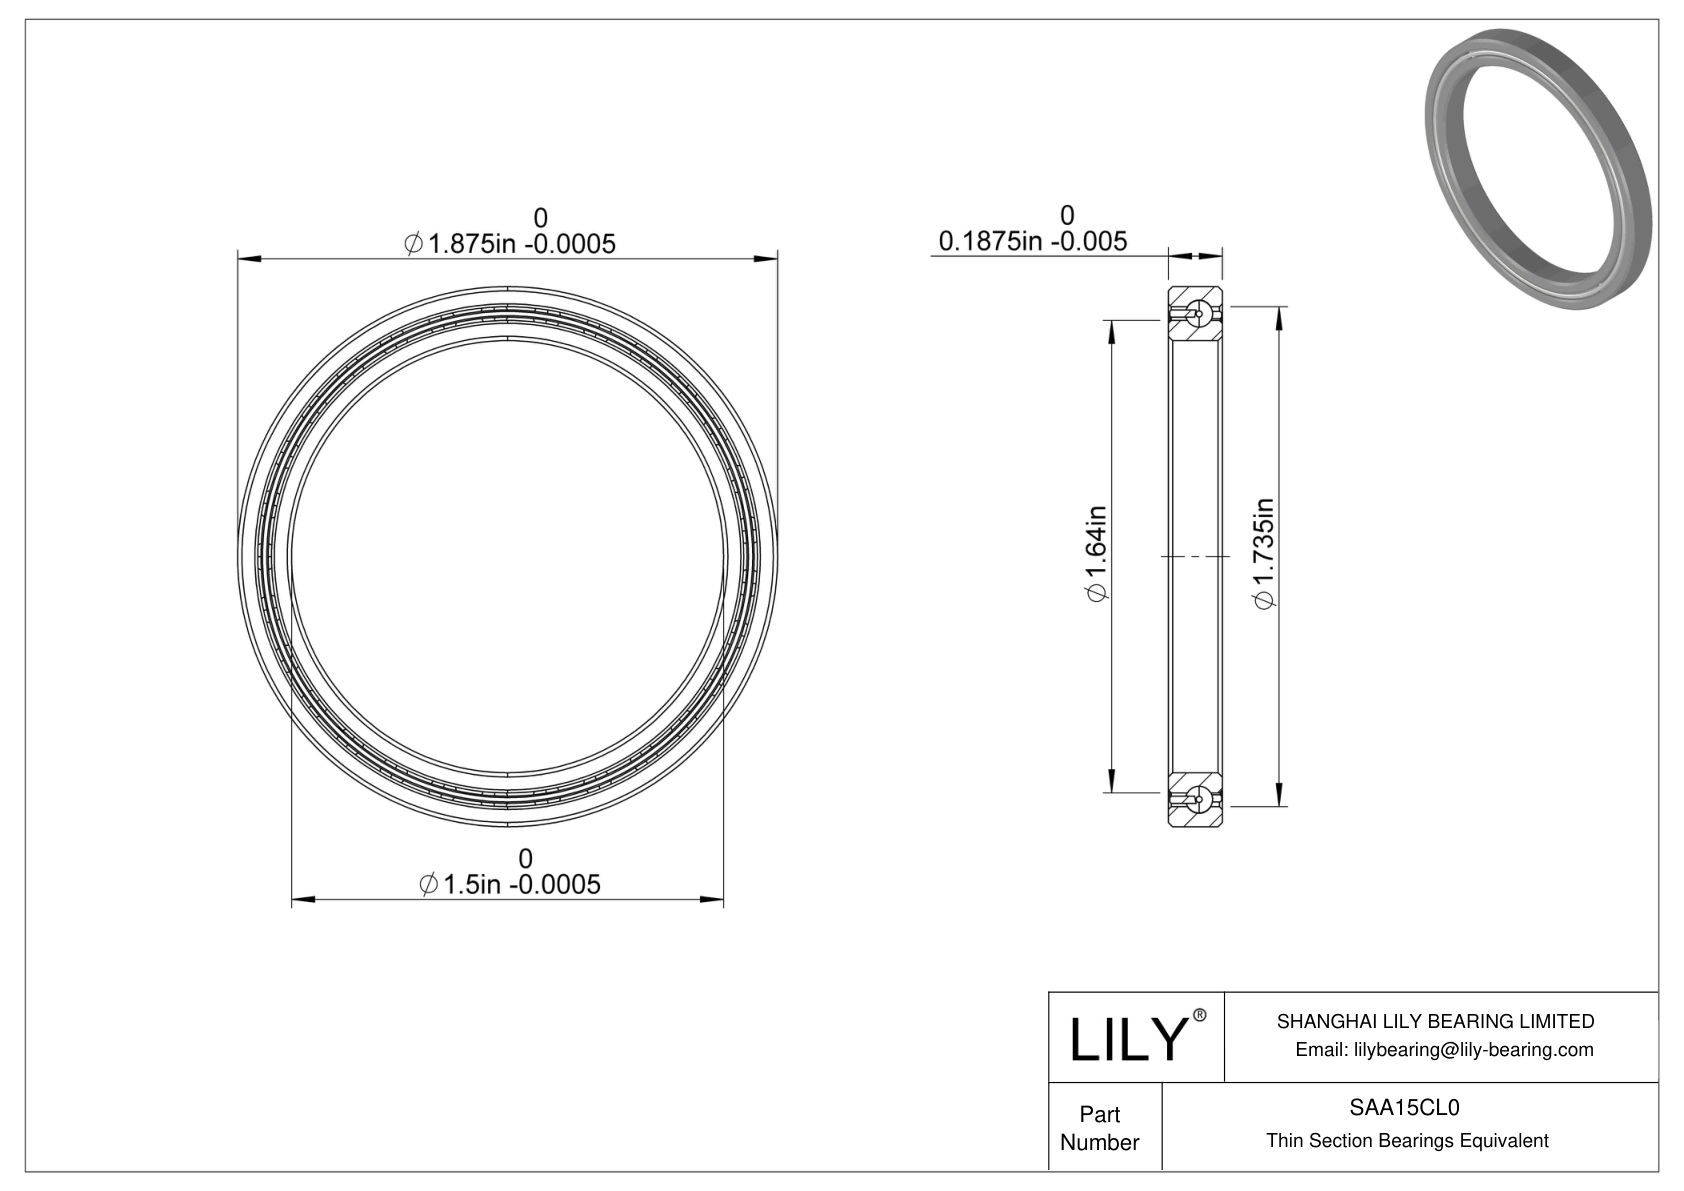 SAA15CL0 Constant Section (CS) Bearings CAD图形